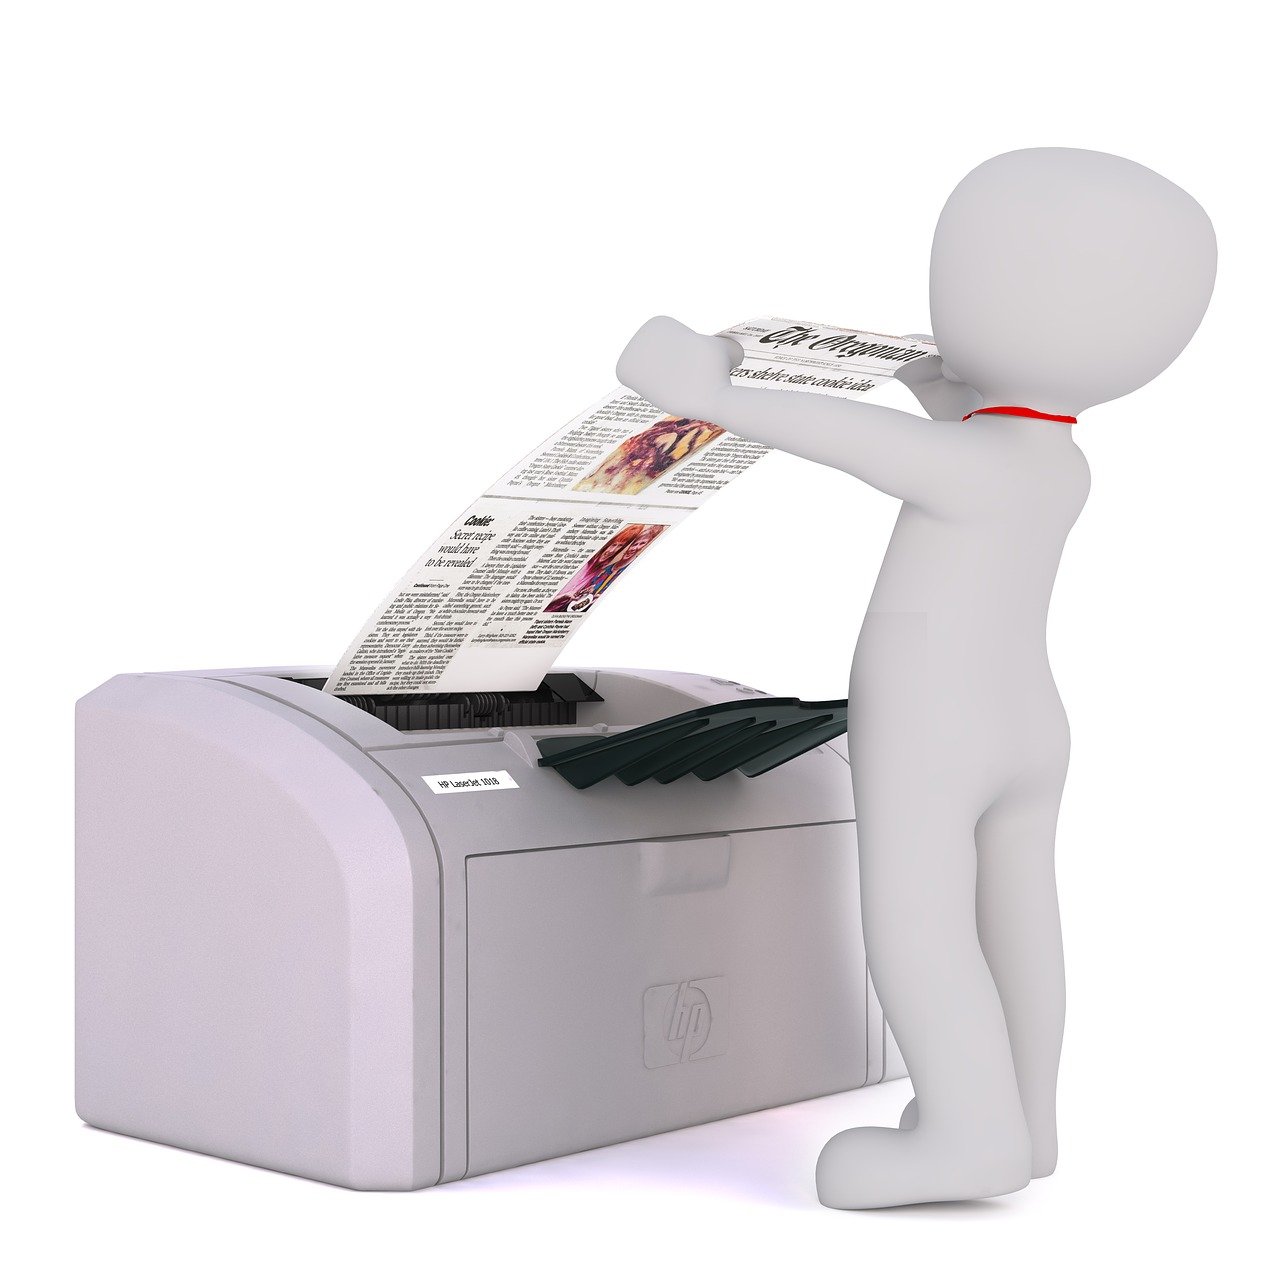 Printer and Scanner Troubleshooting: Fixing Common Issues